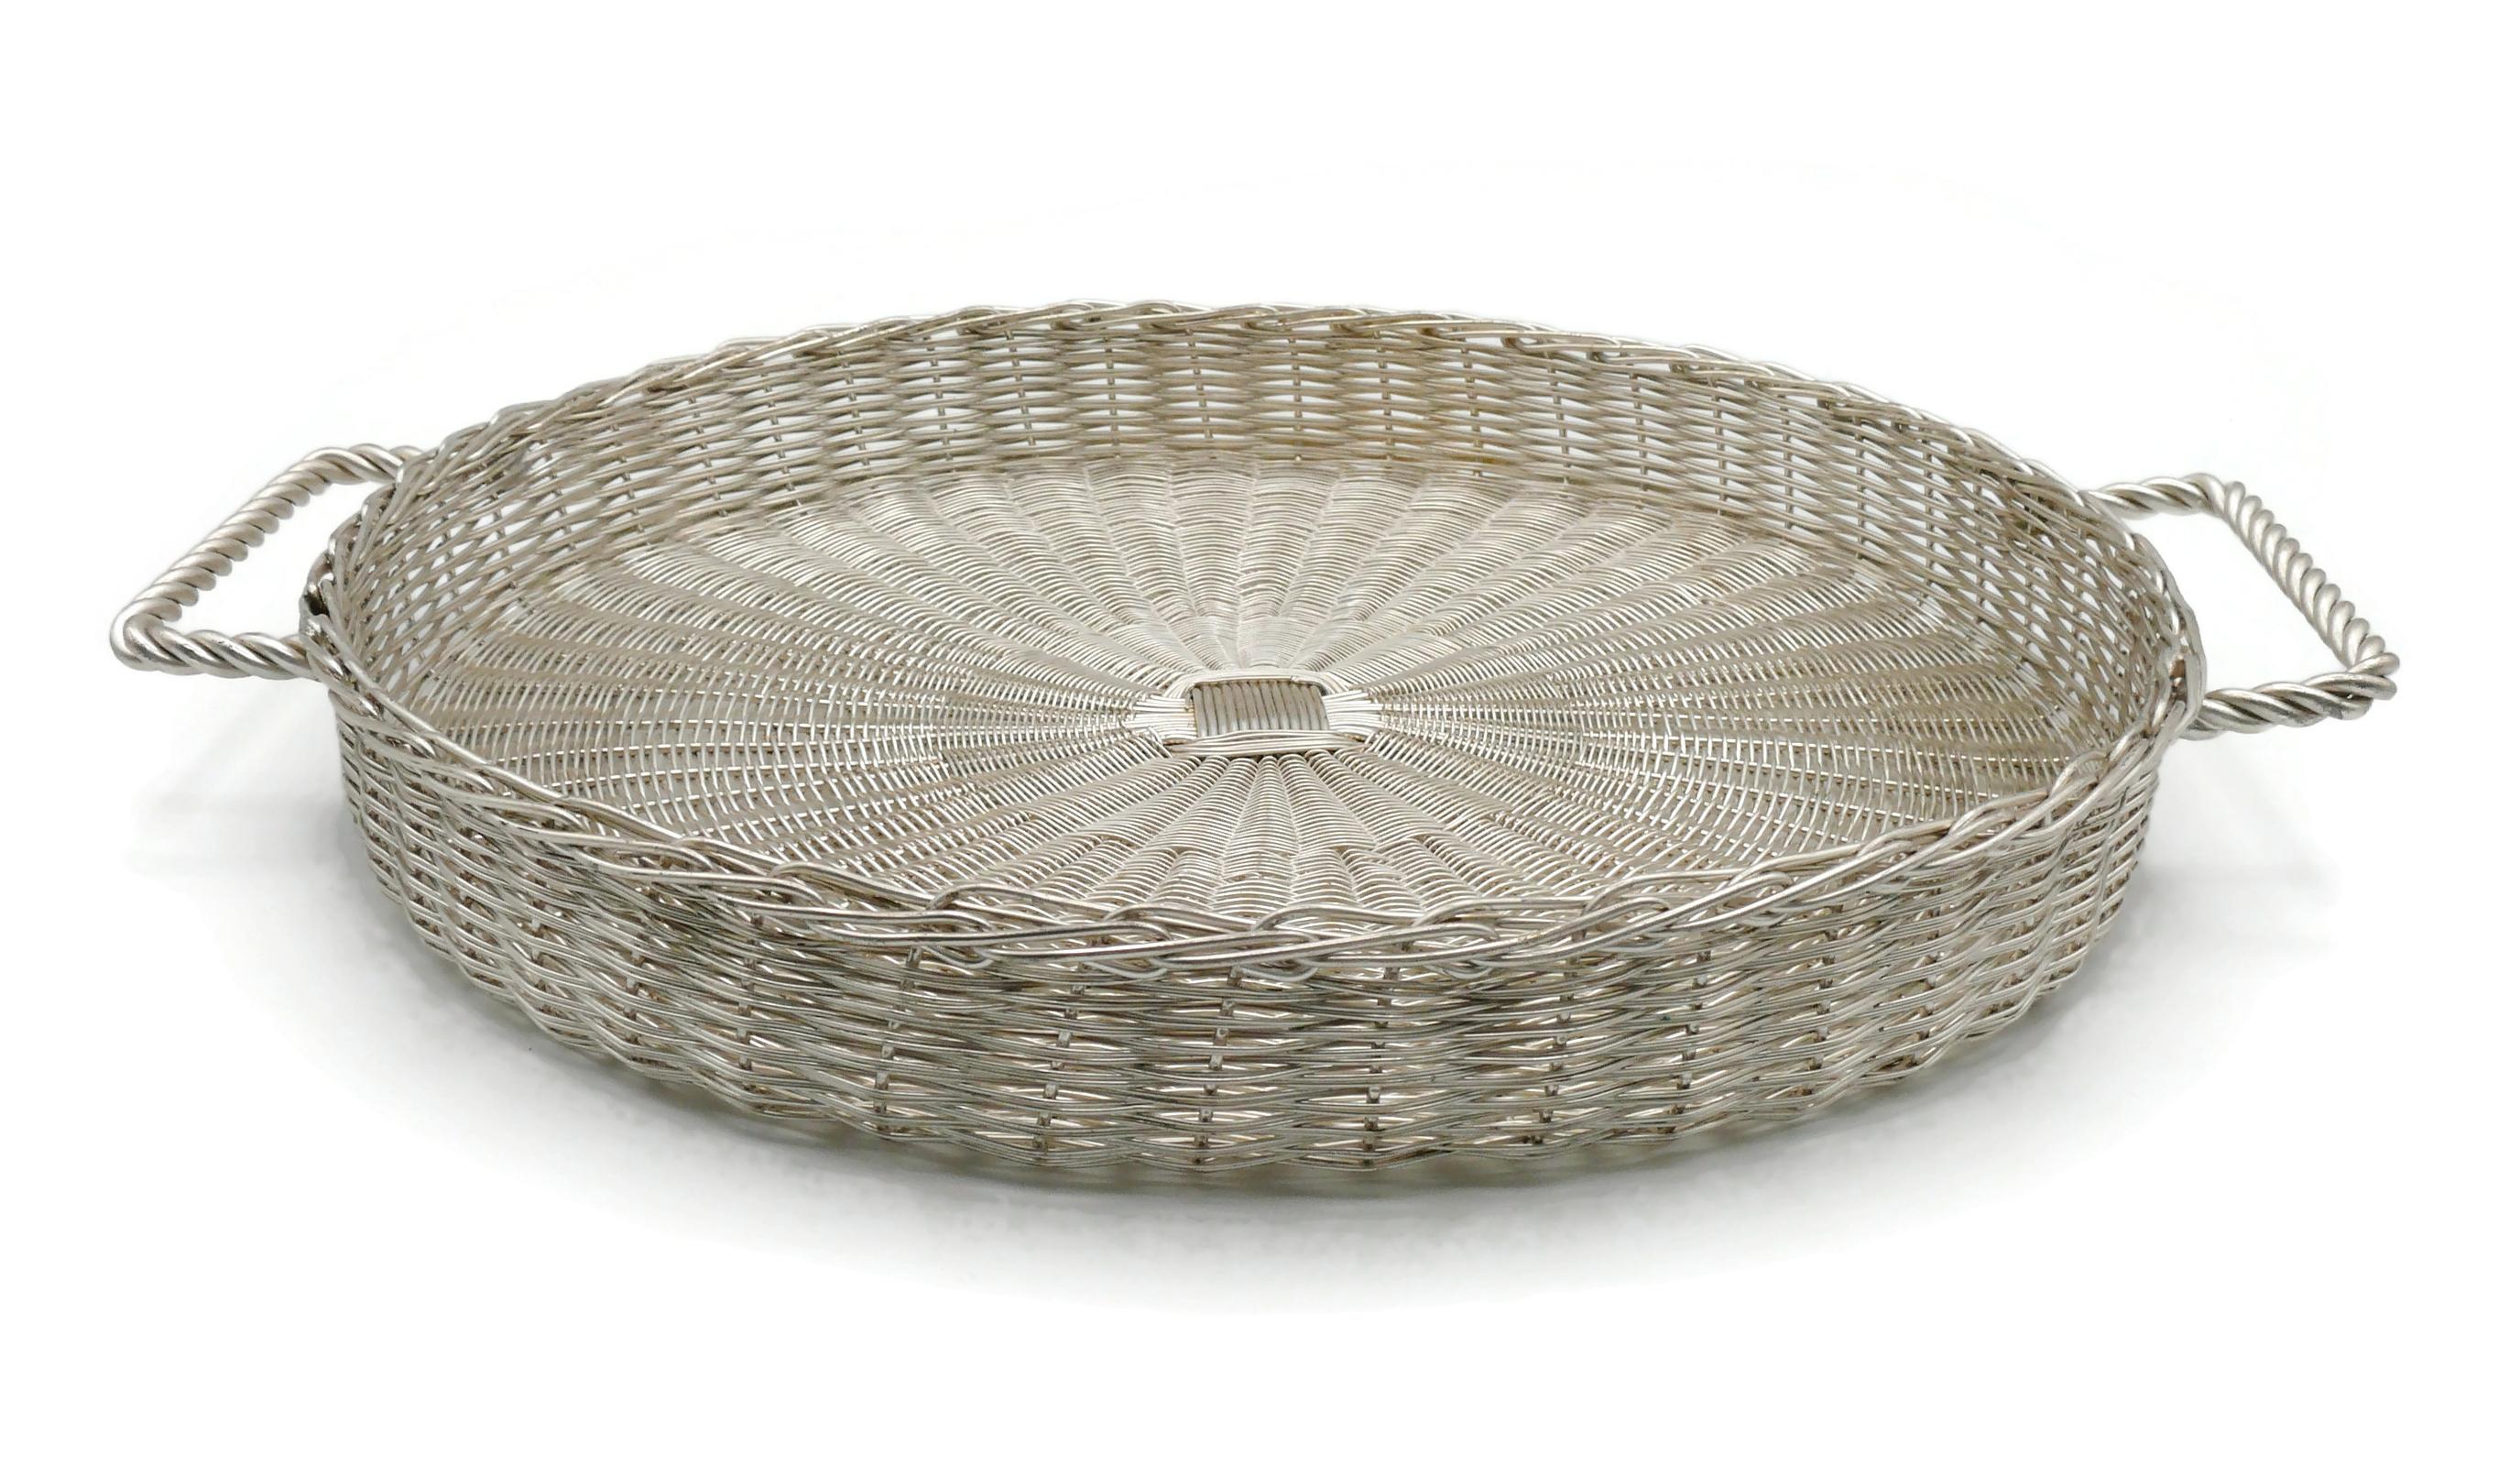 CHRISTIAN DIOR Home Collection Vintage Silver Plated Wicker Style Basket In Good Condition For Sale In Nice, FR